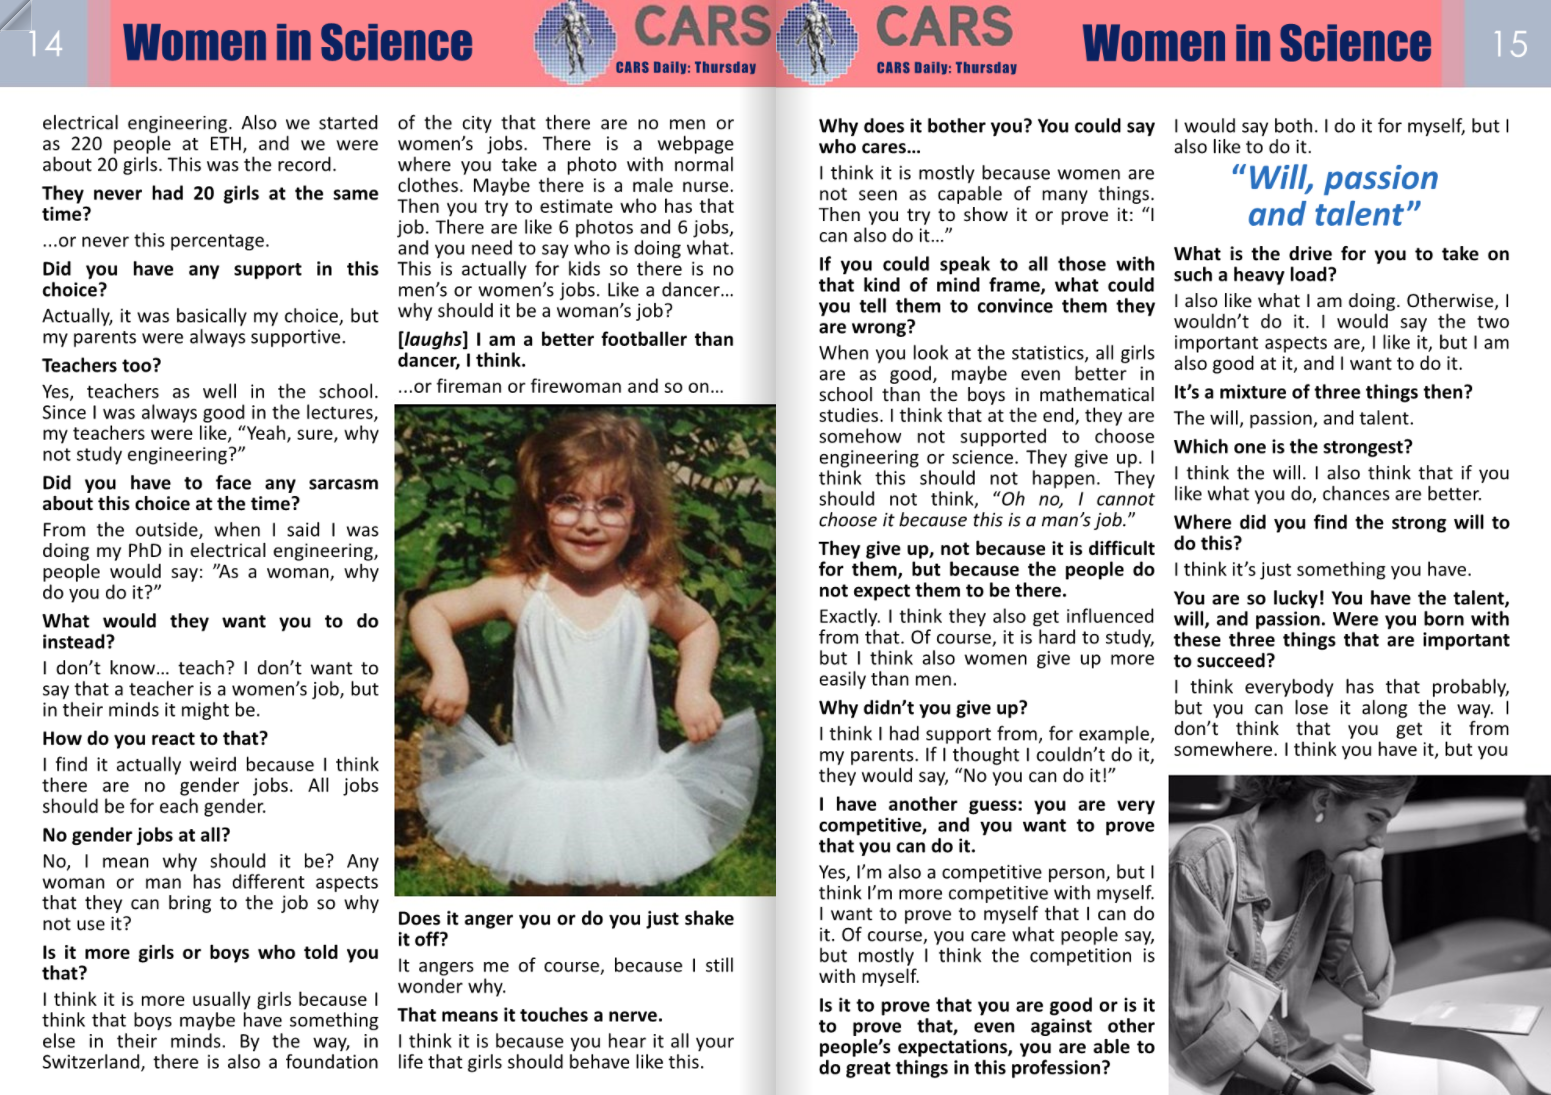 Enlarged view: Interview with Ece, CARS 2017, part 2